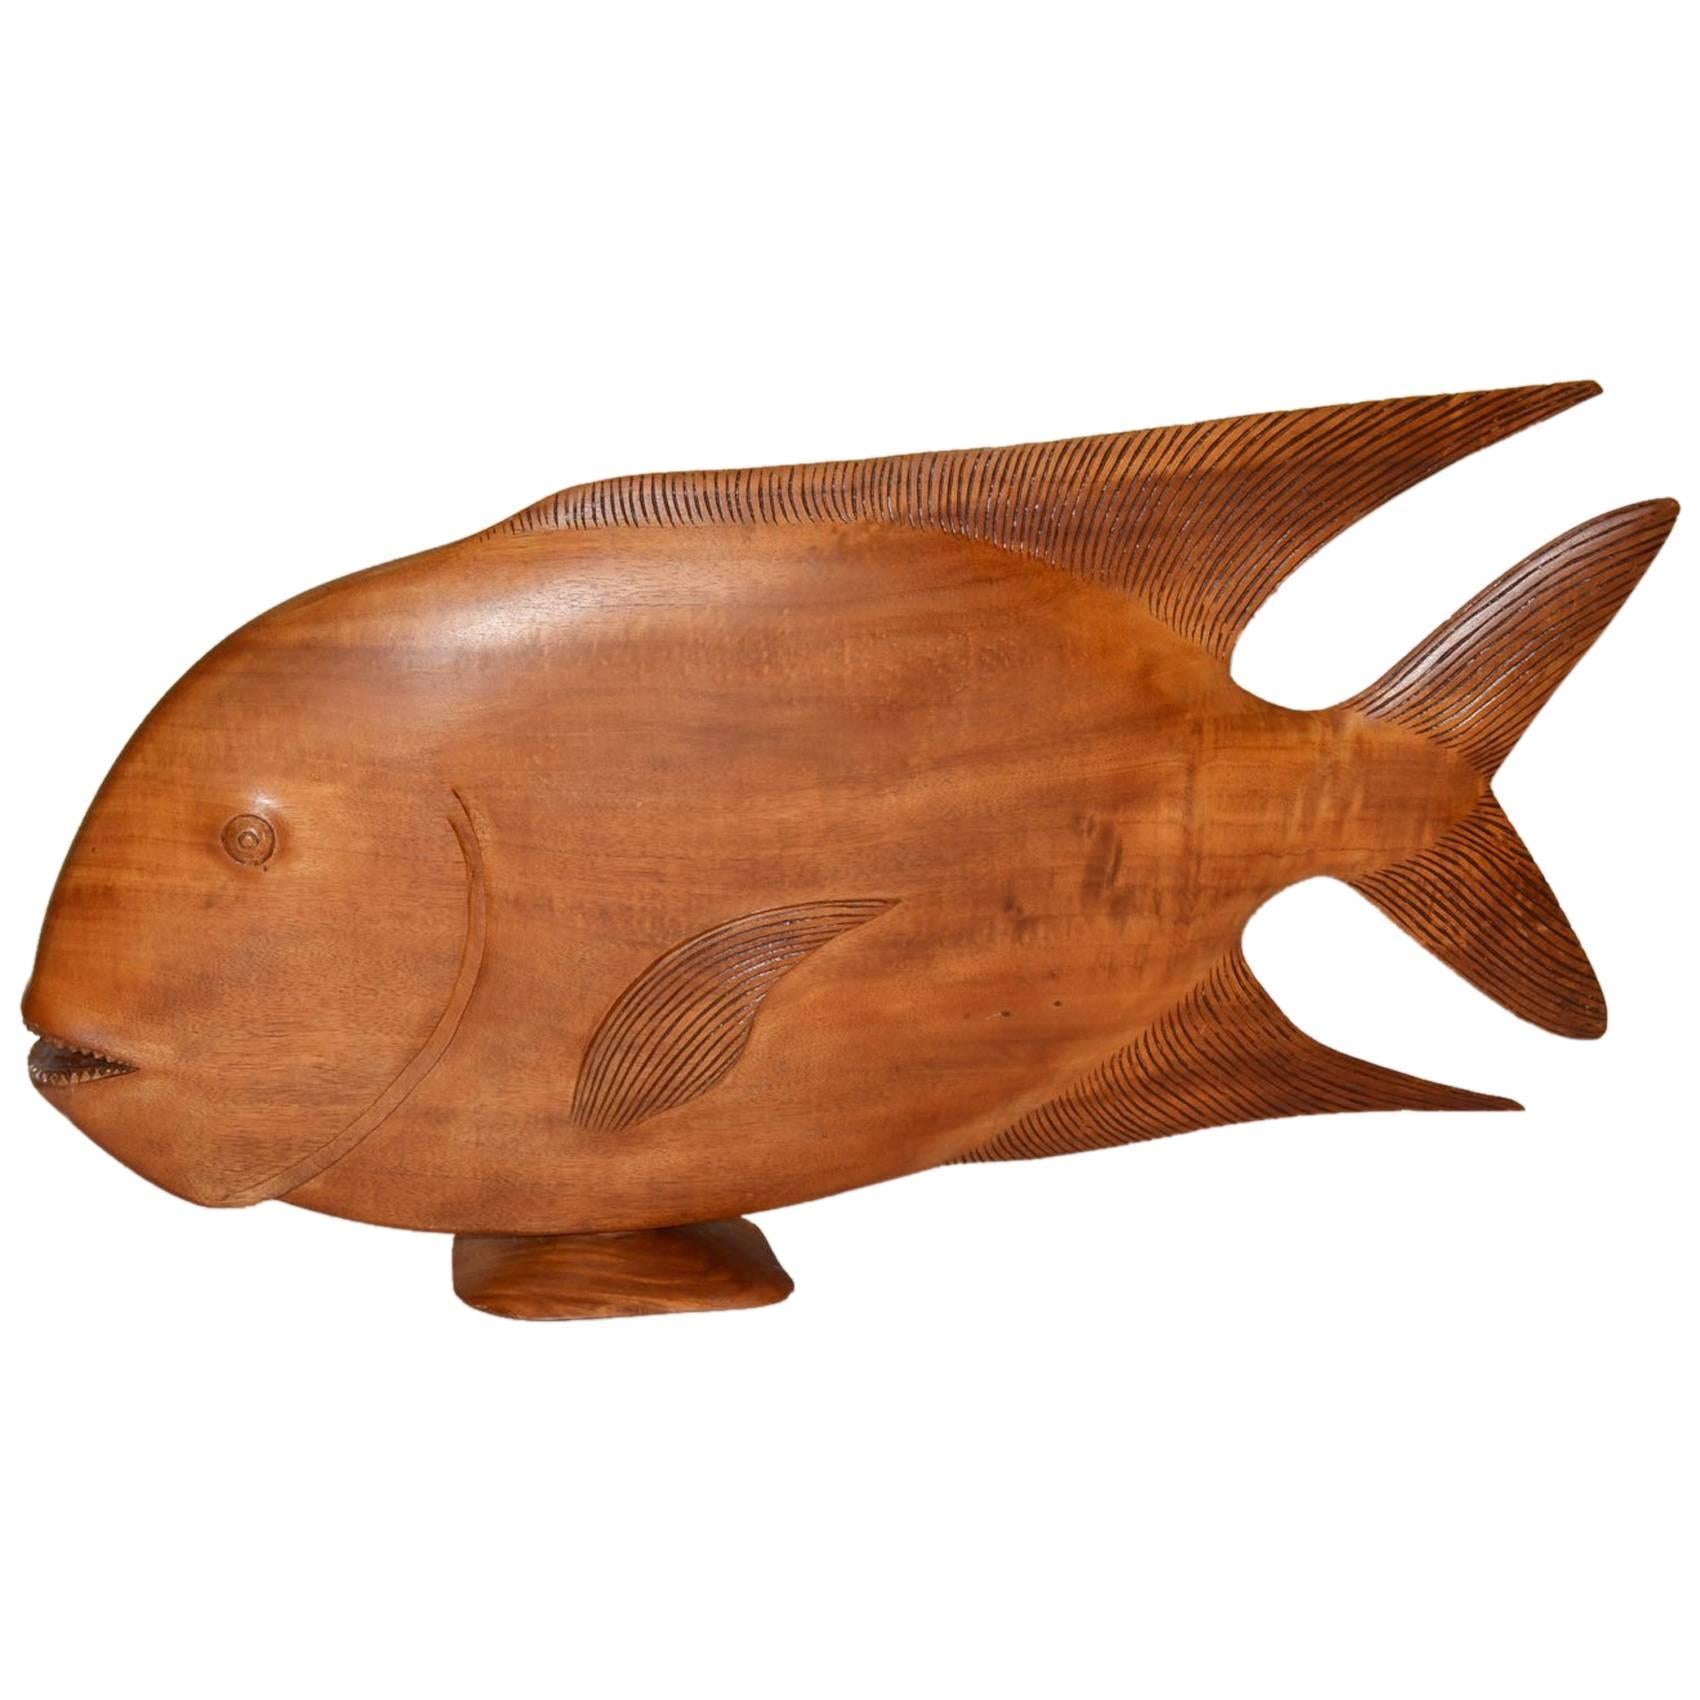 Monumental Brazilian Wood Sculpture Carving of a Tropical Fish